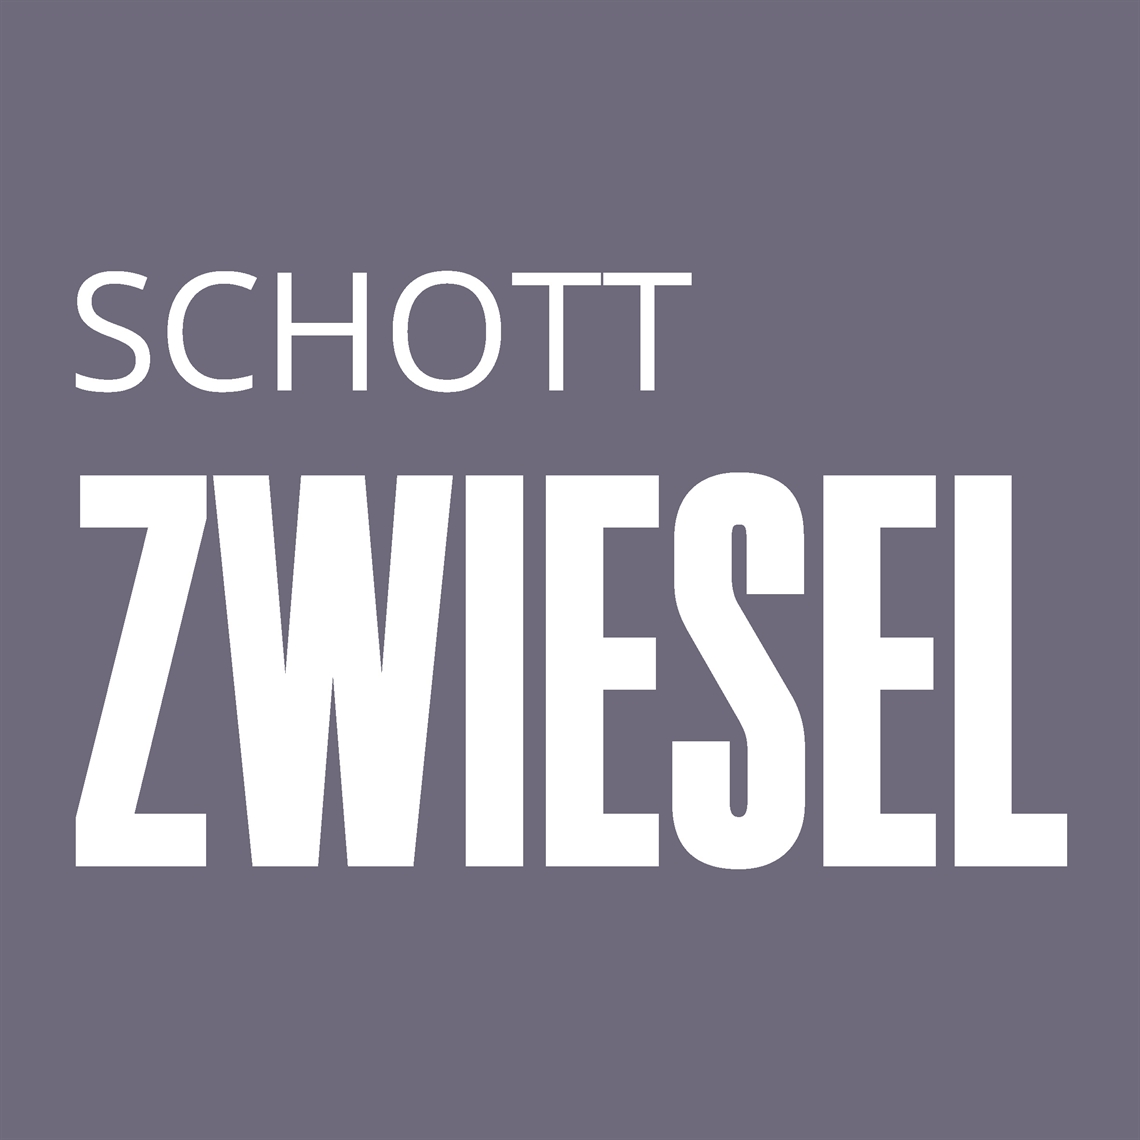 View our collection of Schott Zwiesel STARlight